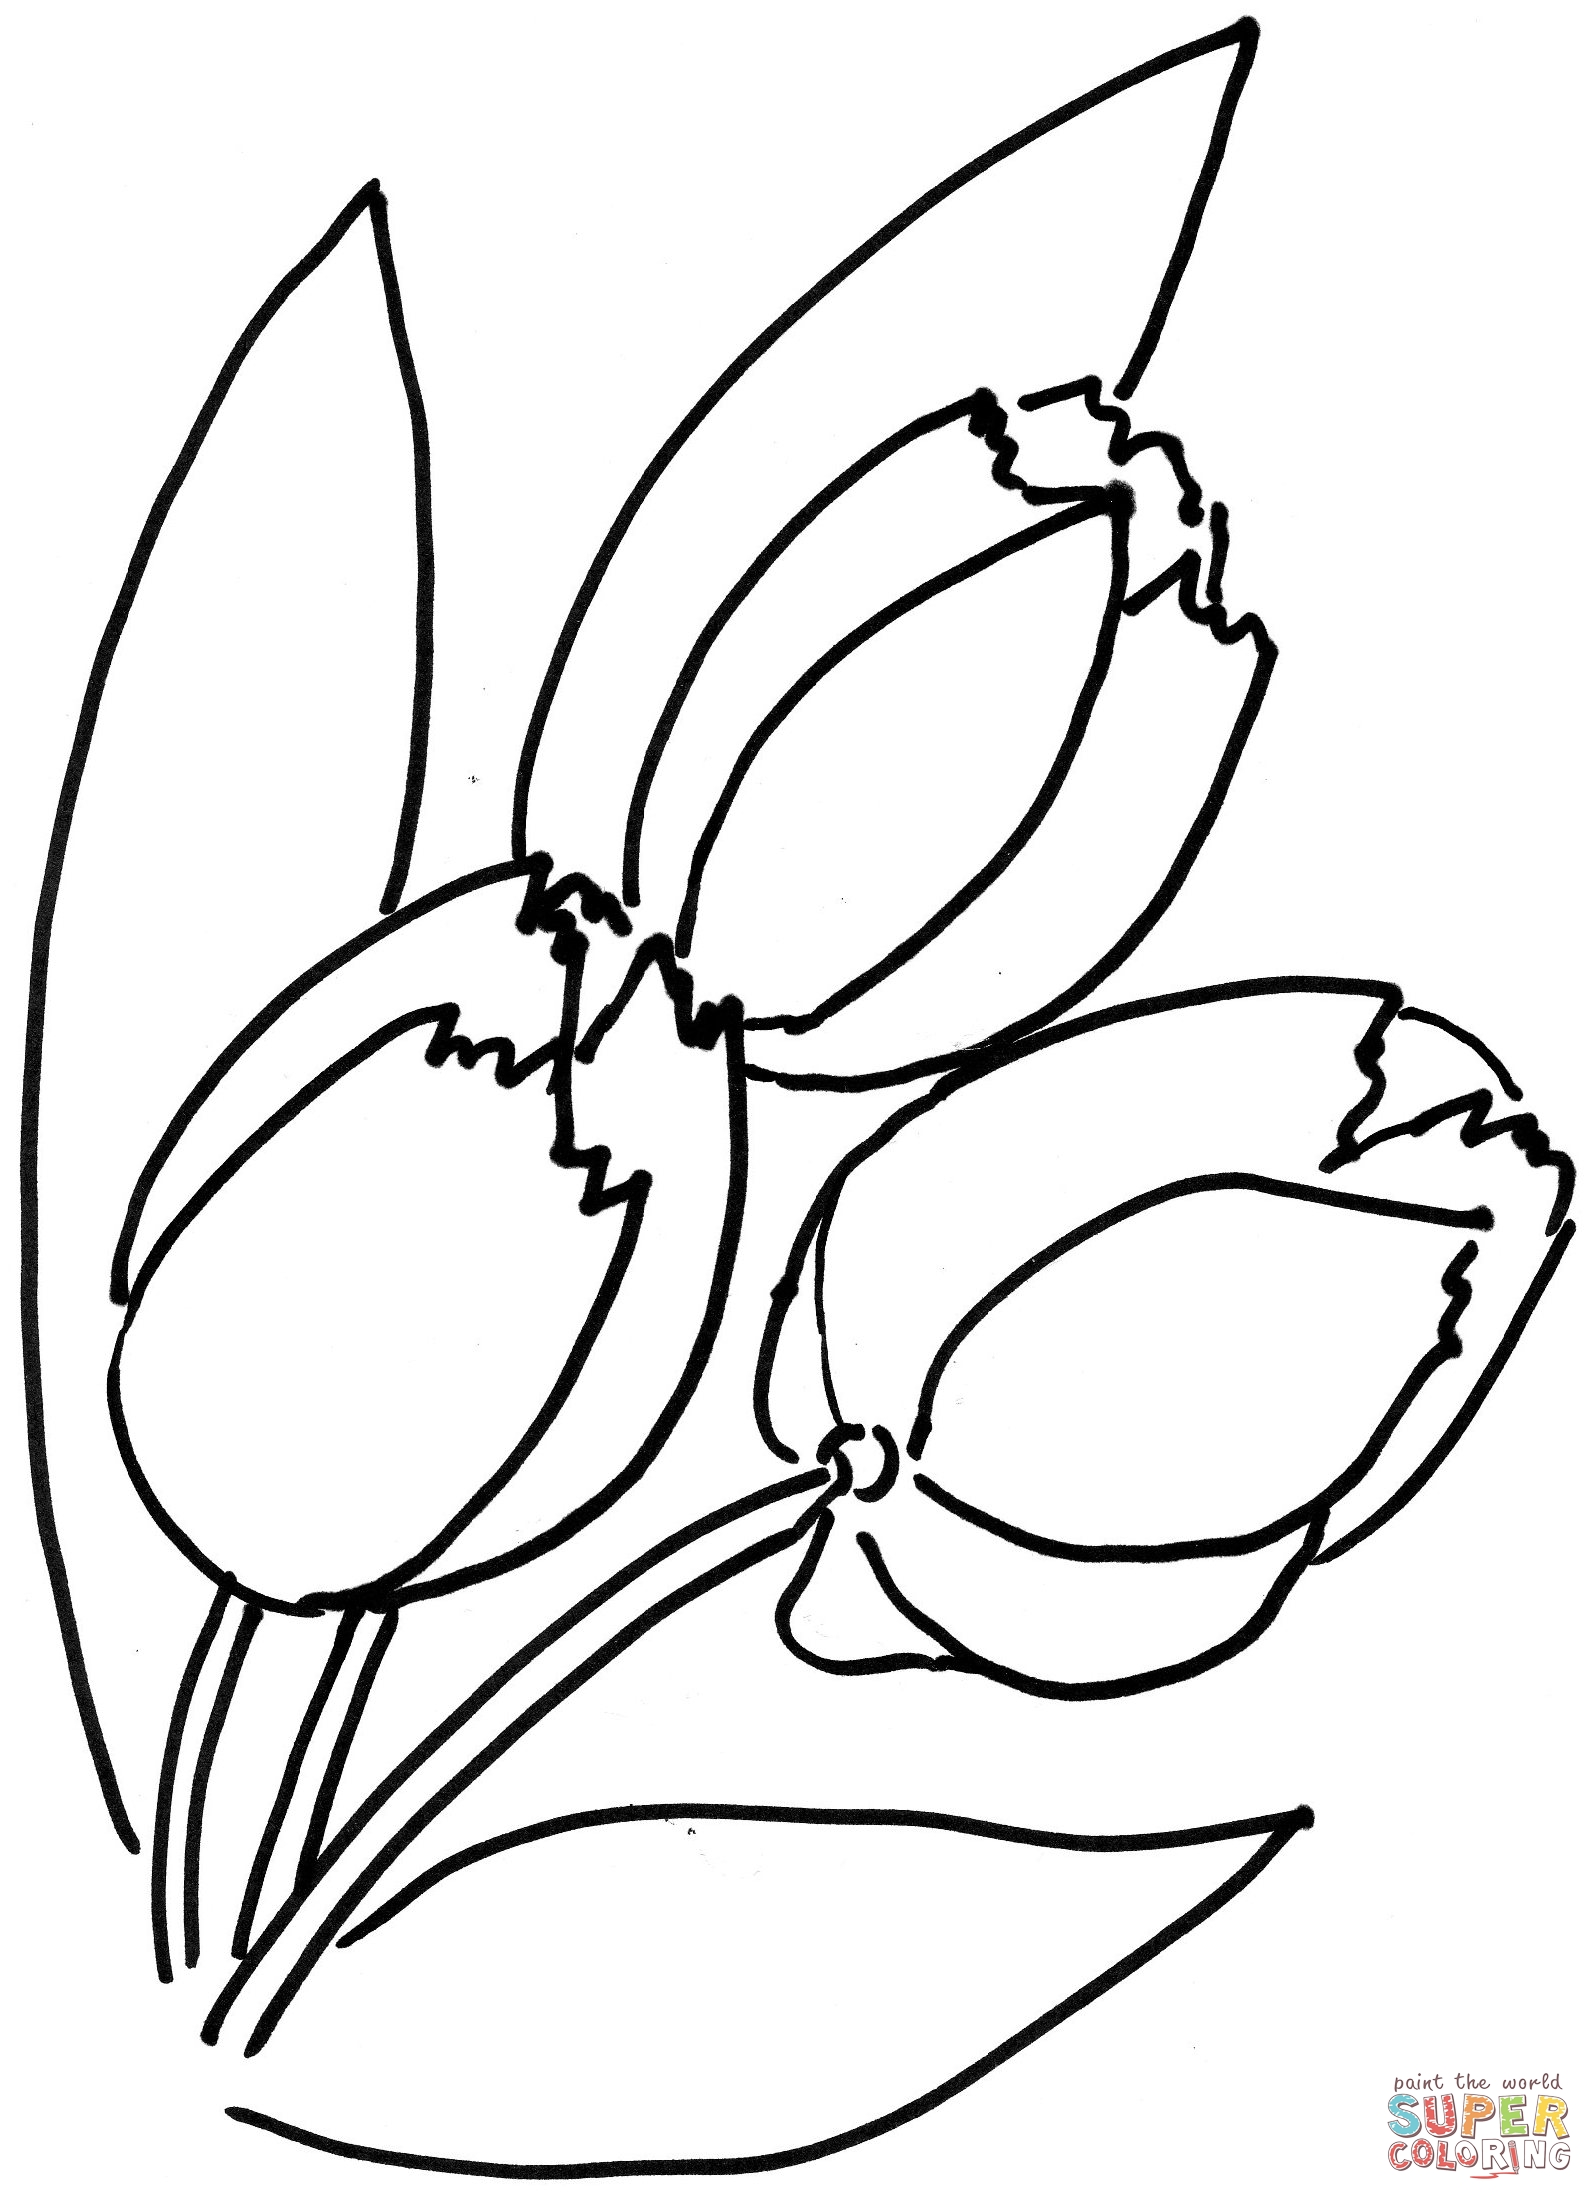 Tulips To Color - ClipArt Best